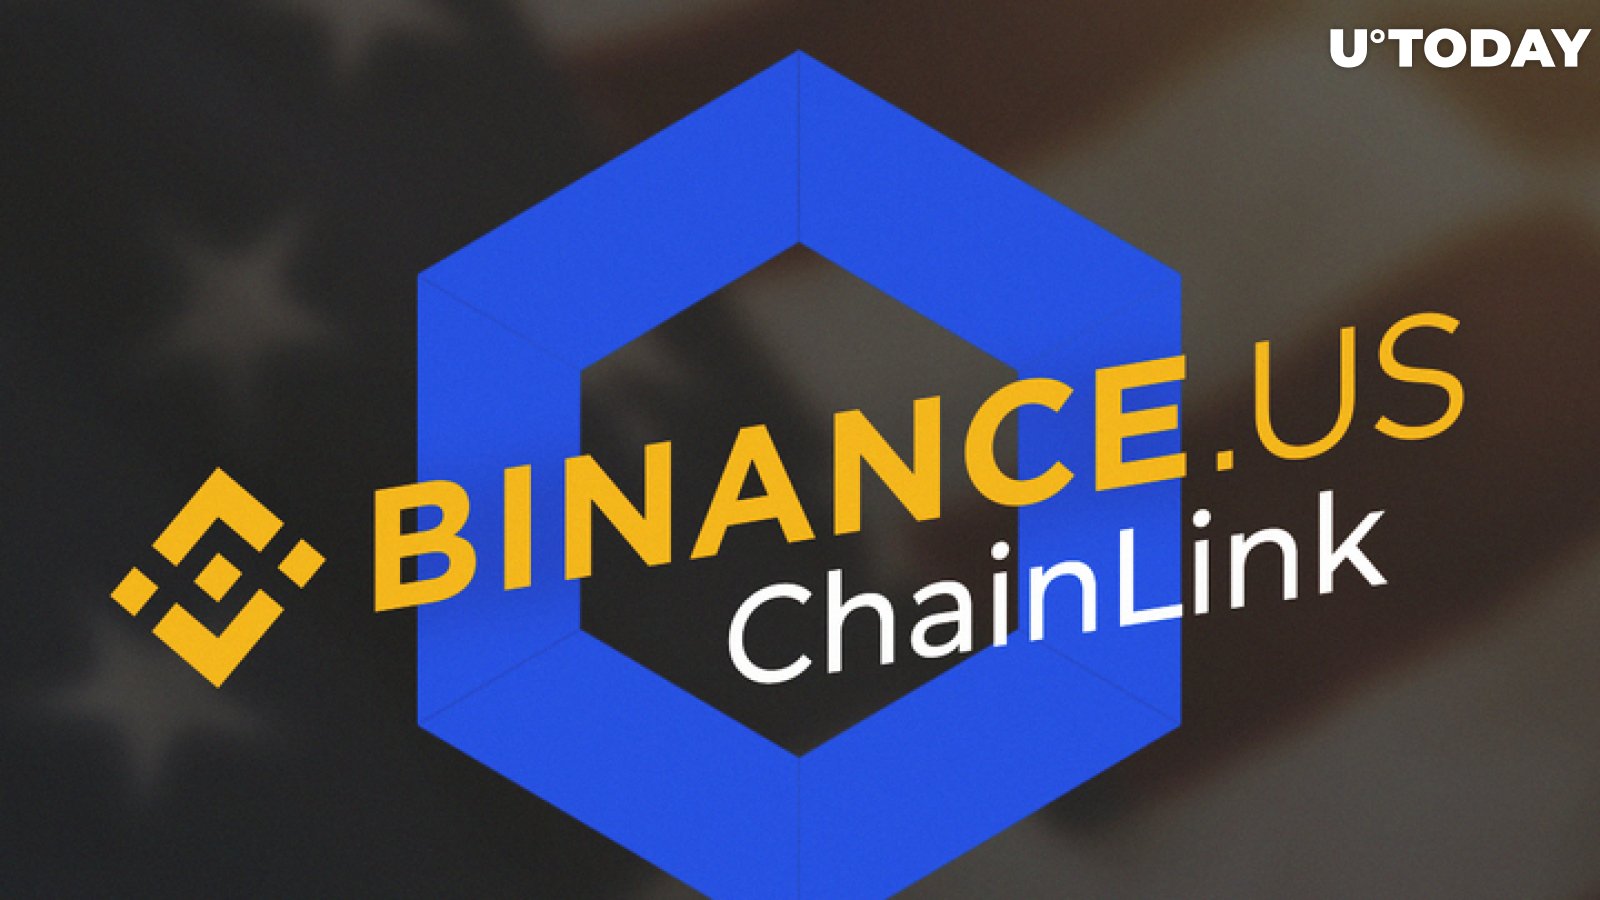 Chainlink (LINK) Goes Live on Binance US. Will It Hit $3 and Surpass Tron?